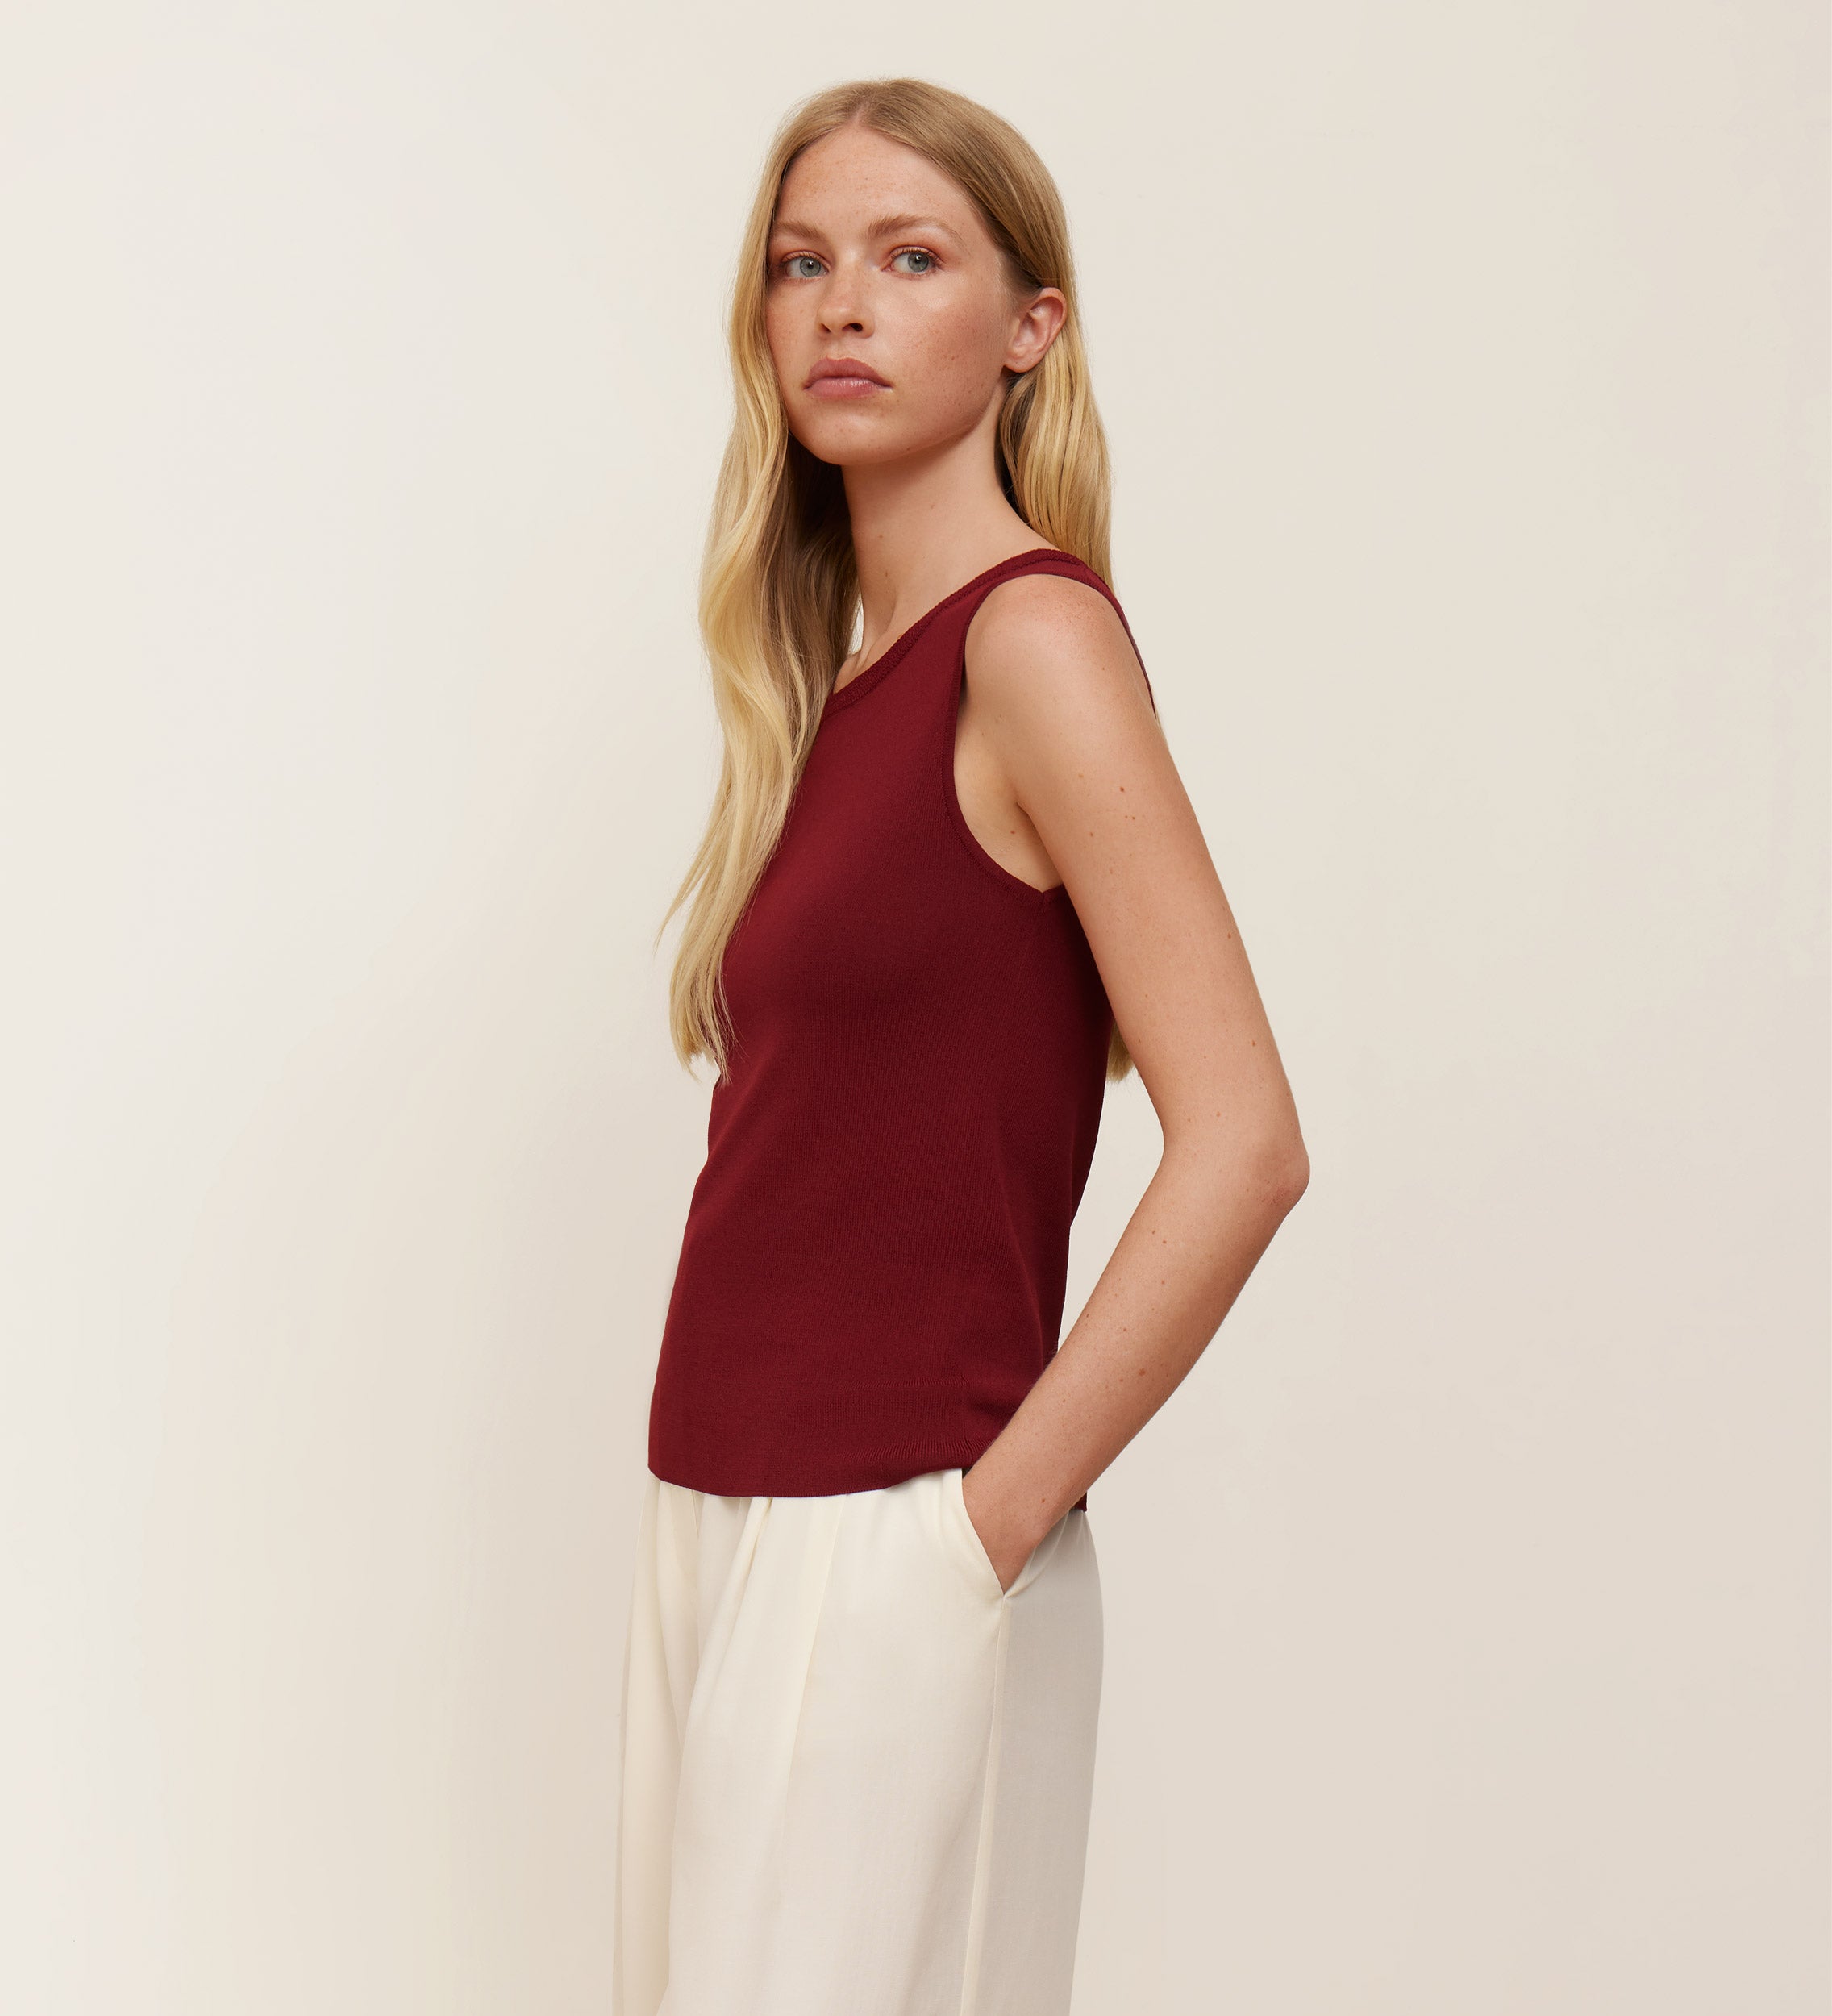 Tricot top with armholes